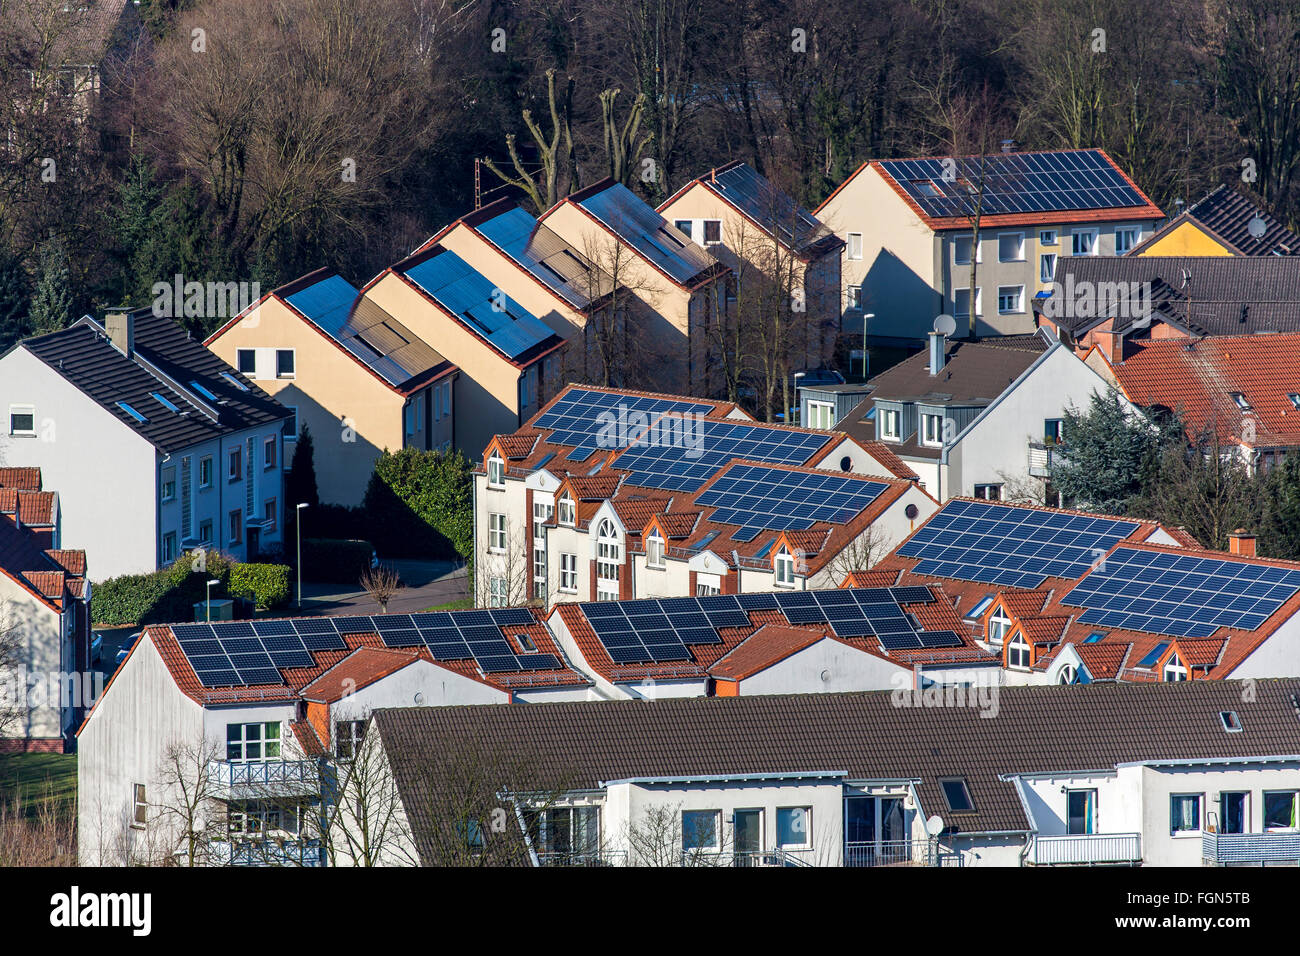 Houses with solar panels on the roof, solar energy, Bottrop, Germany Stock Photo